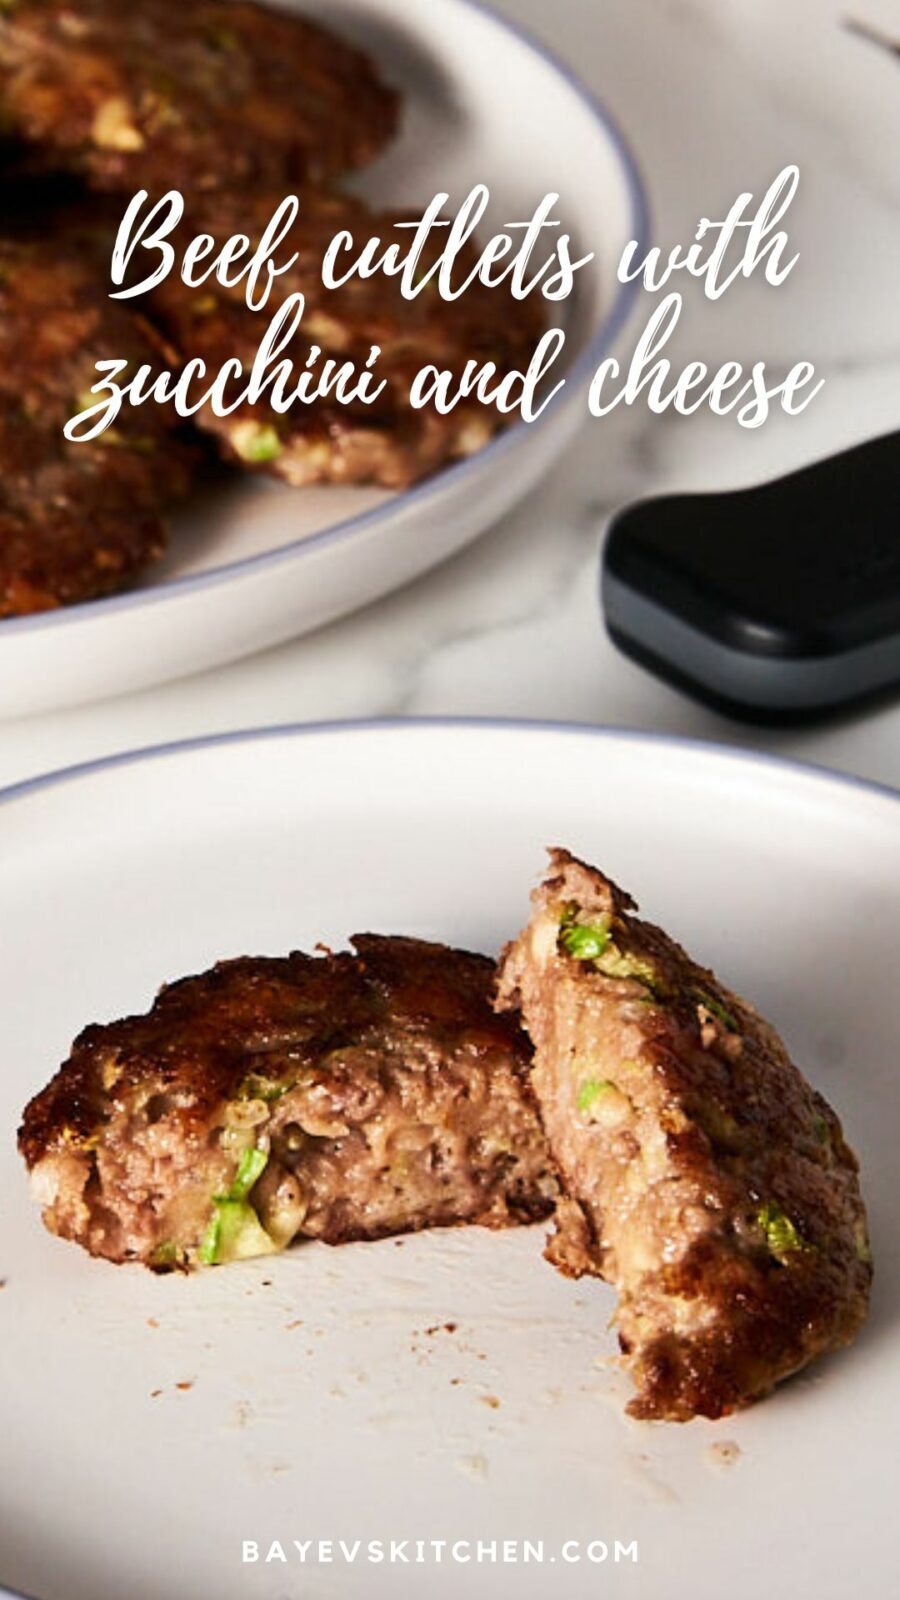 Beef cutlets with zucchini and cheese by bayevskitchen.com